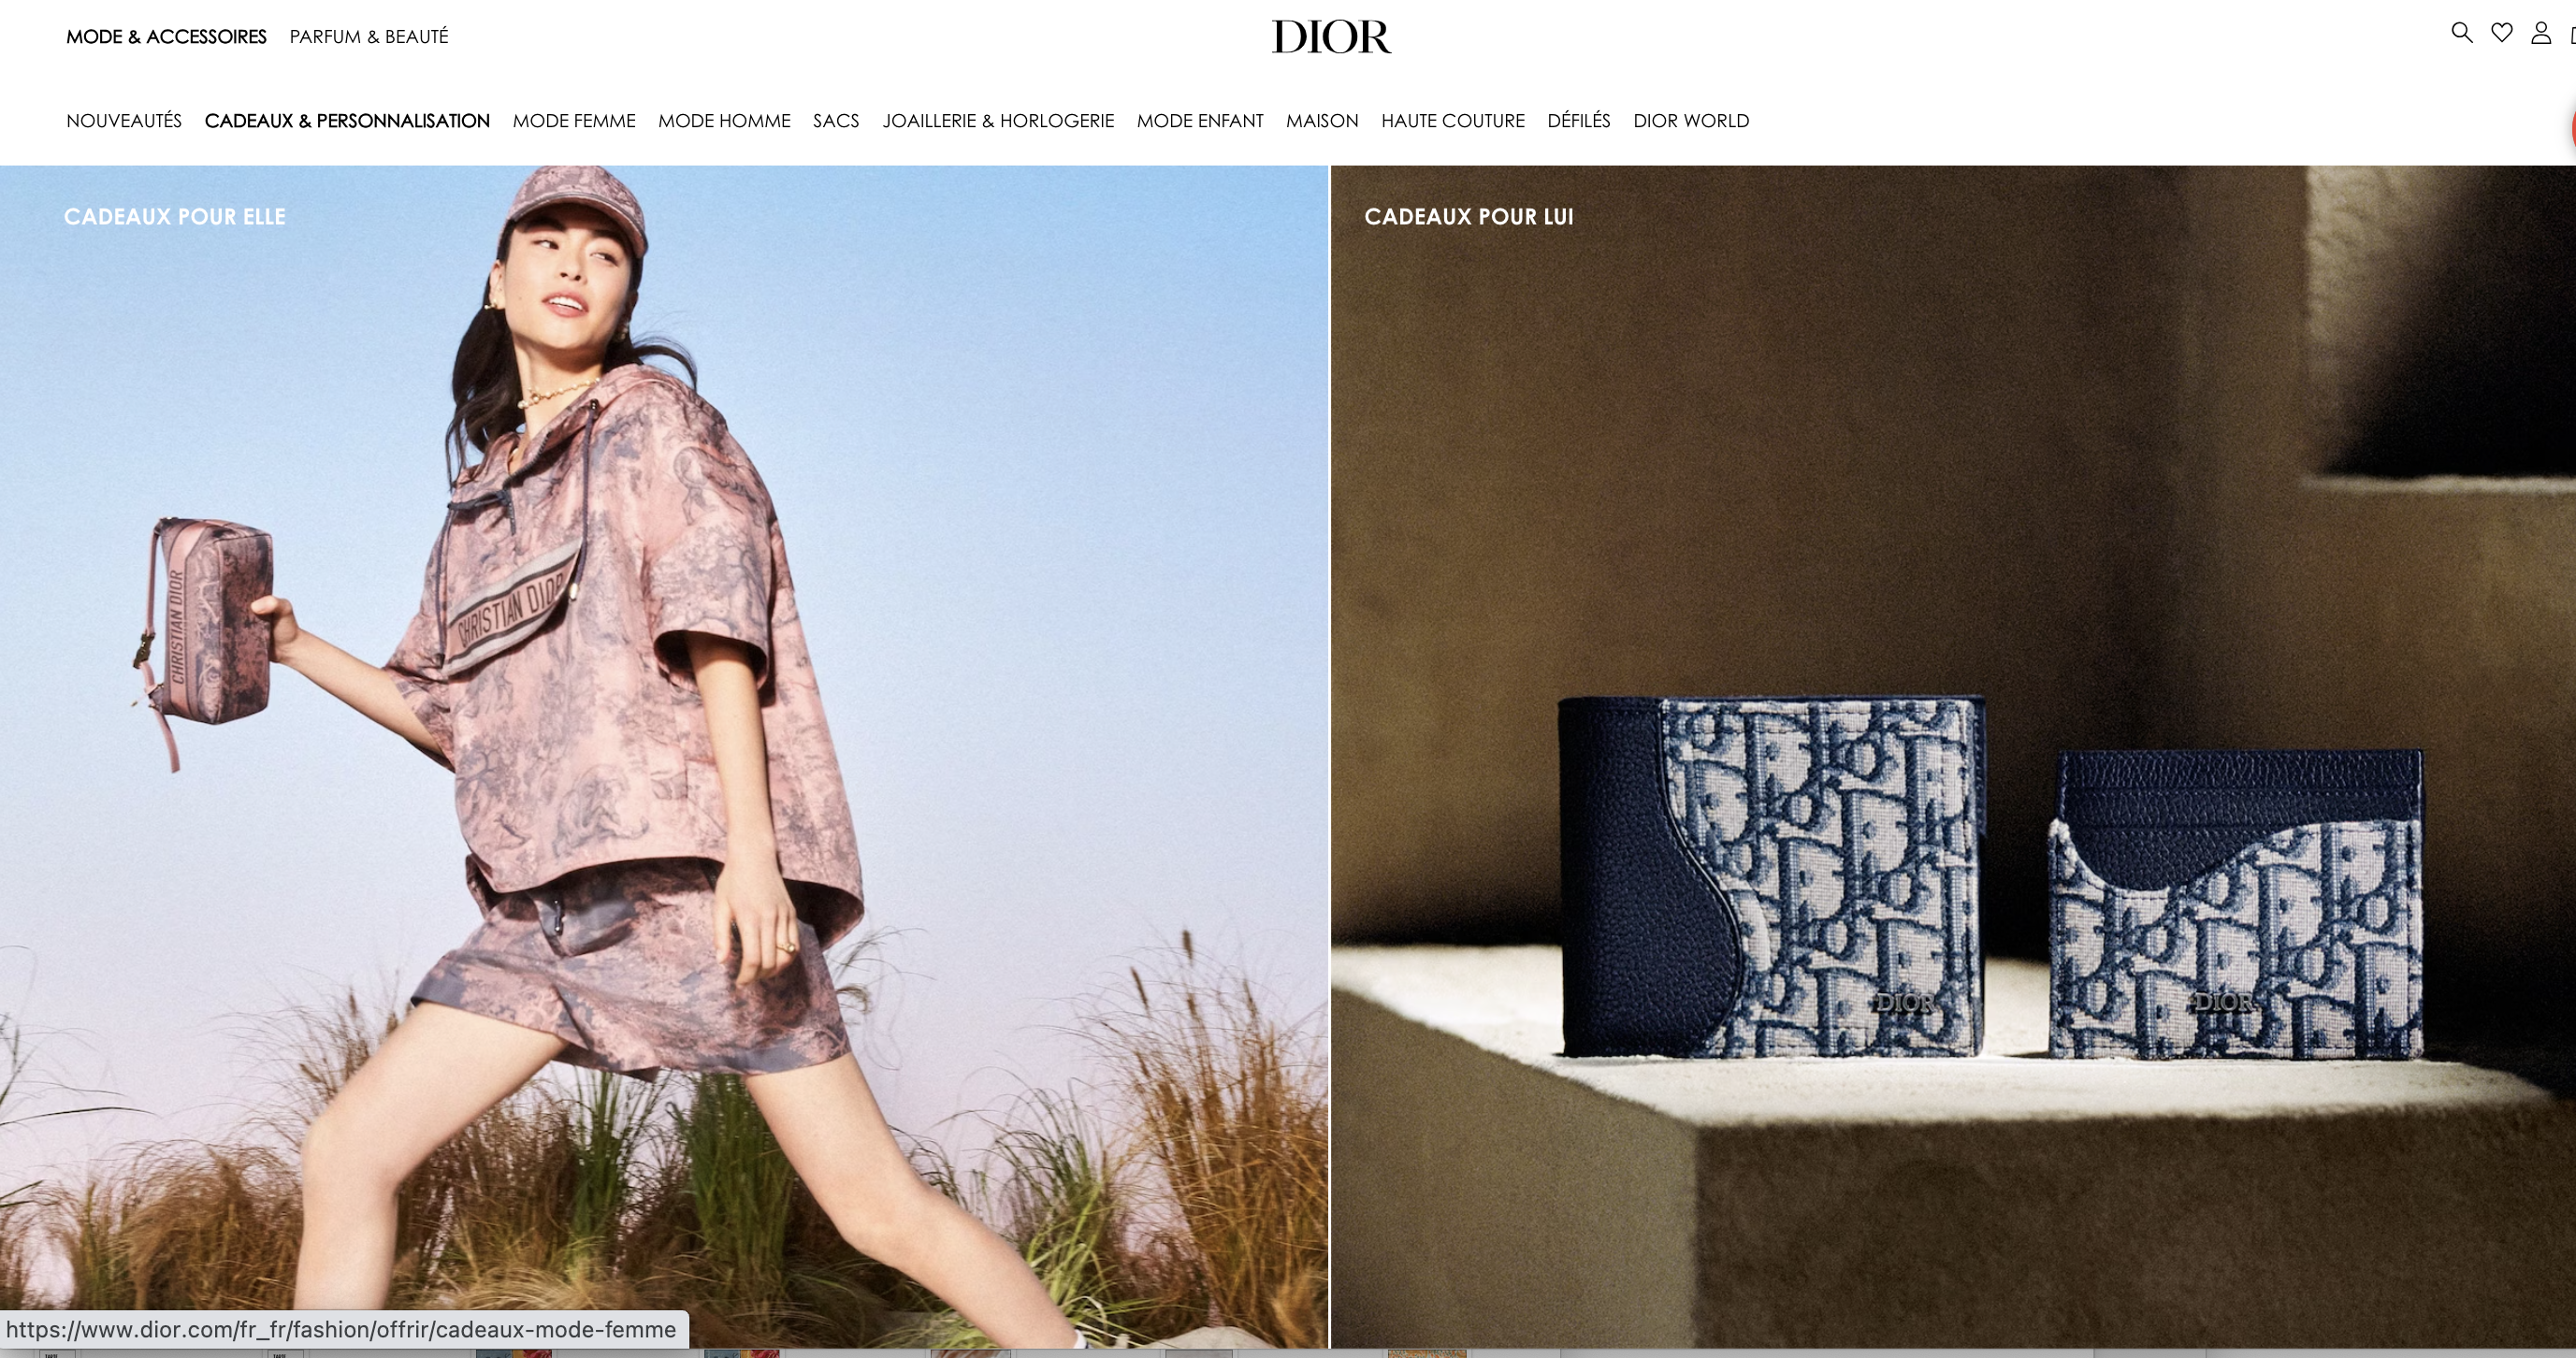 dior-home-page